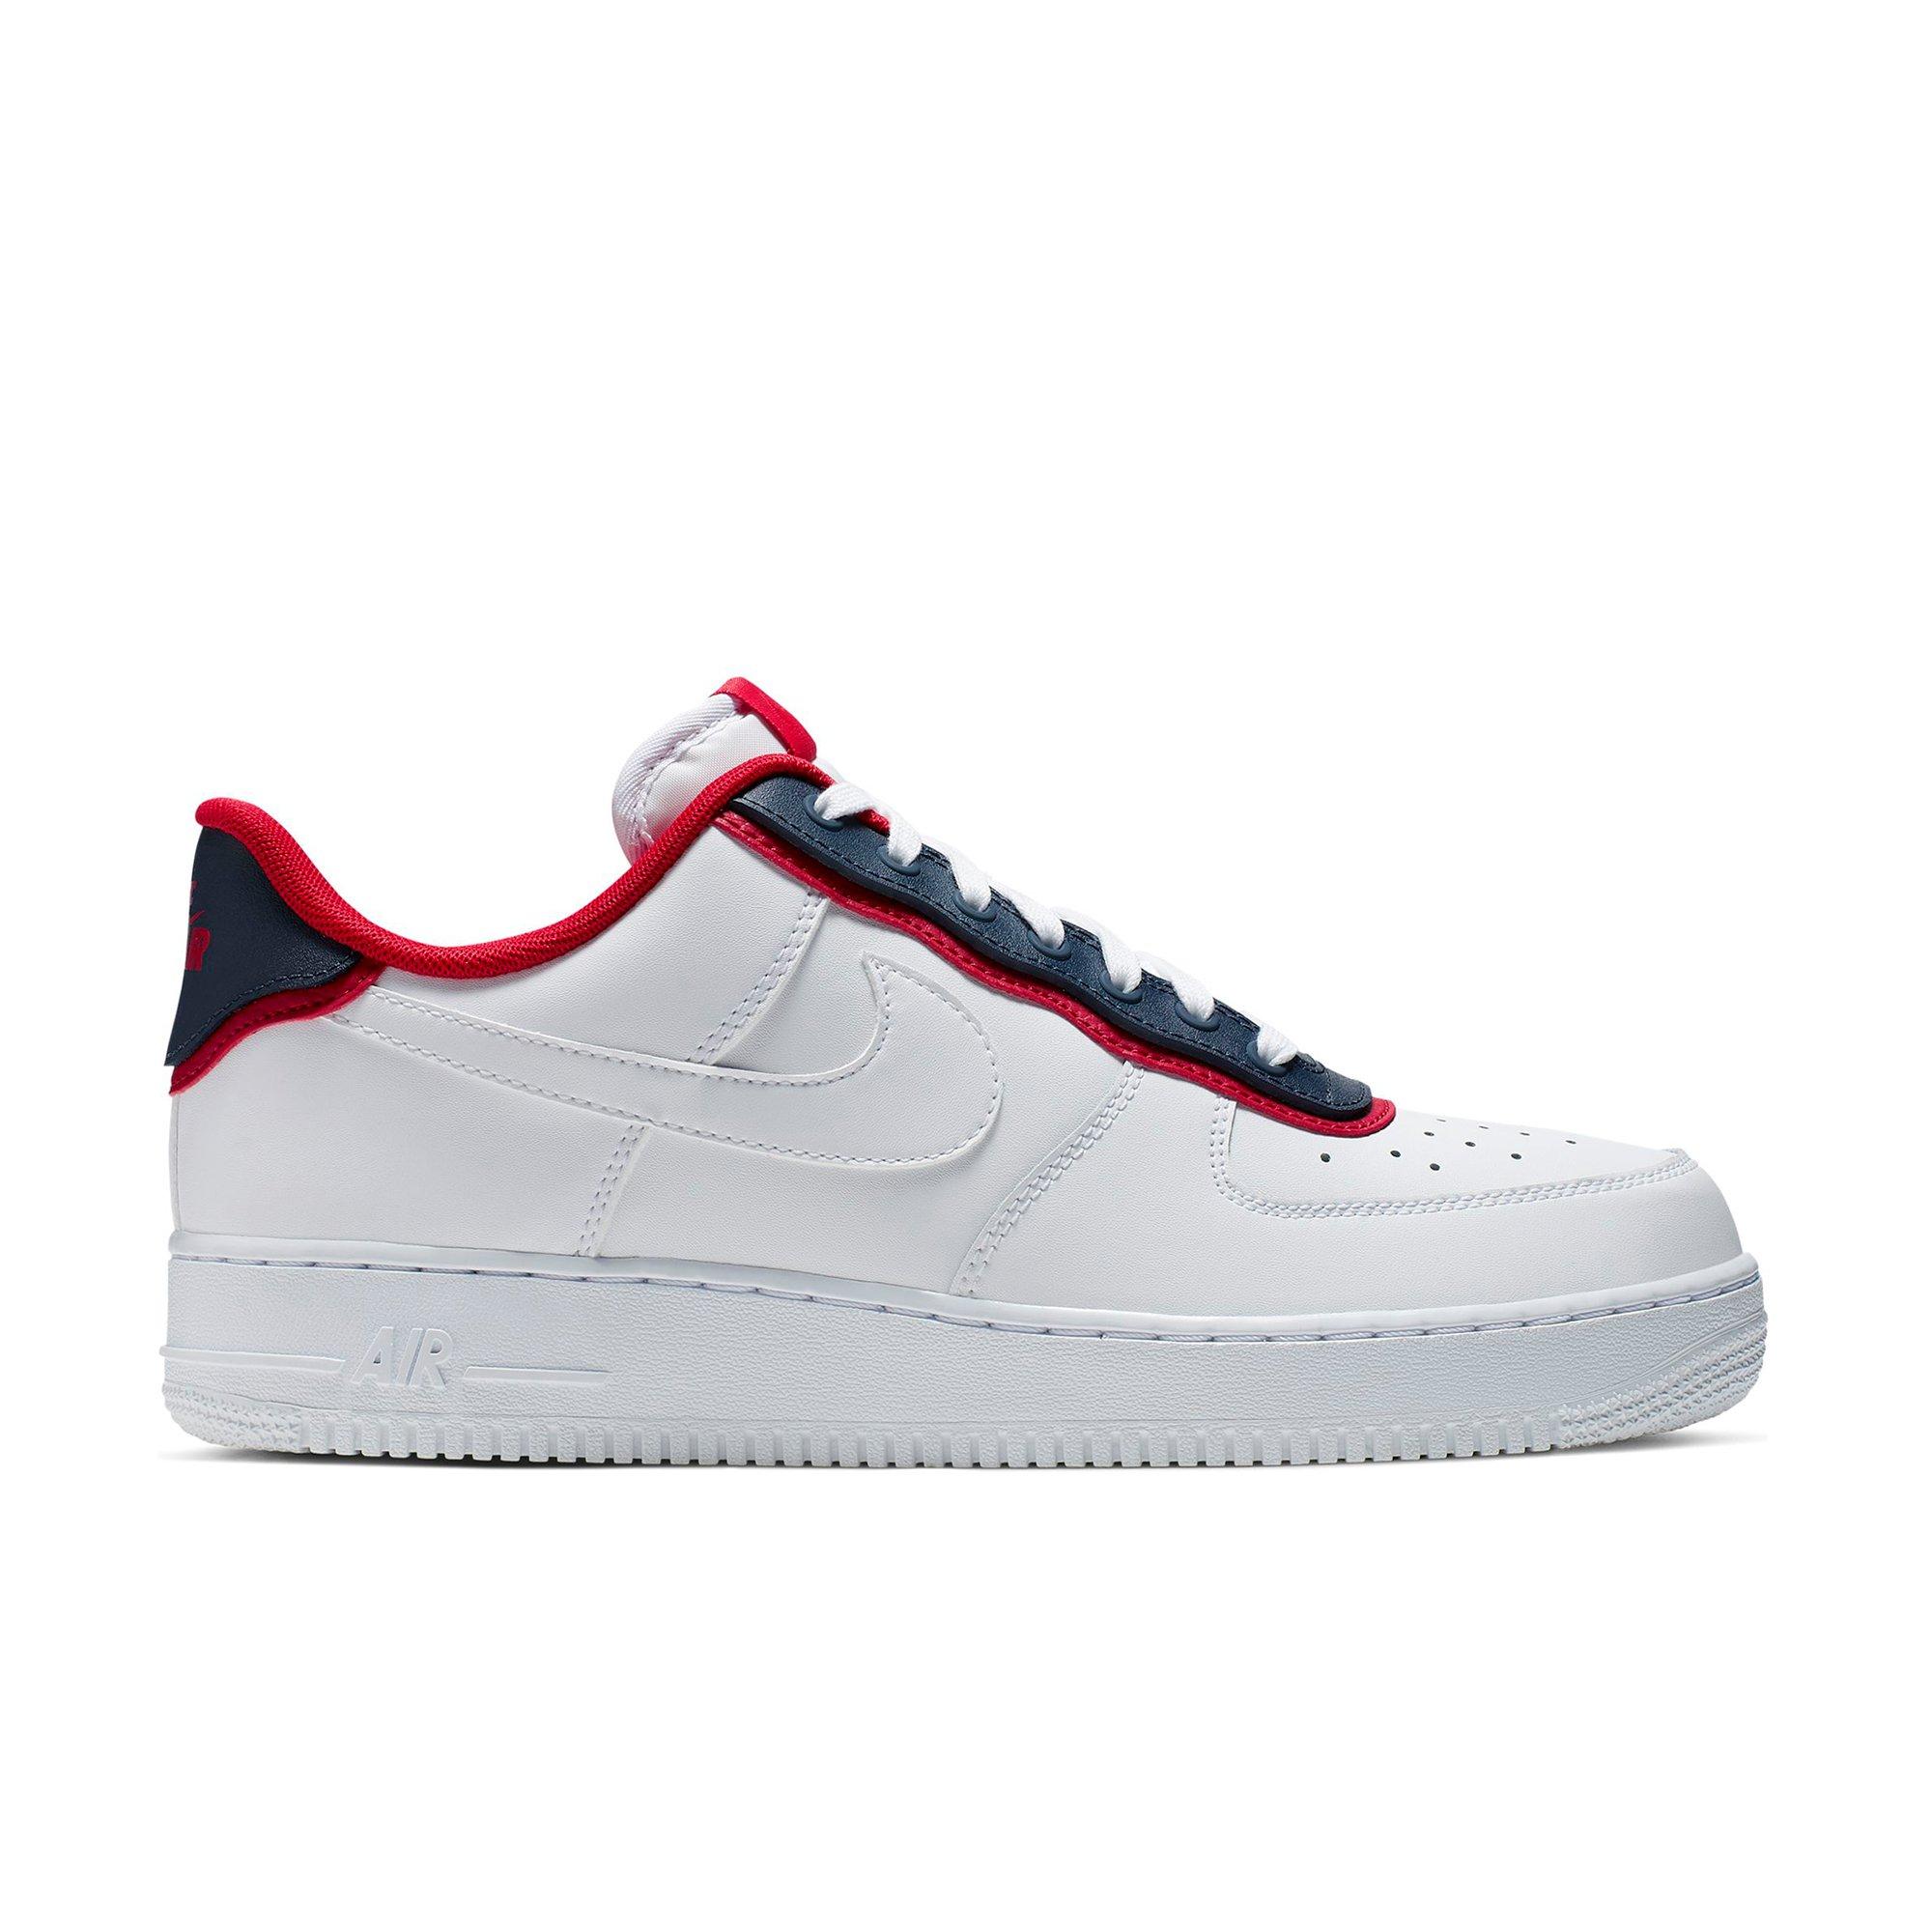 nike air force 1 navy blue and red